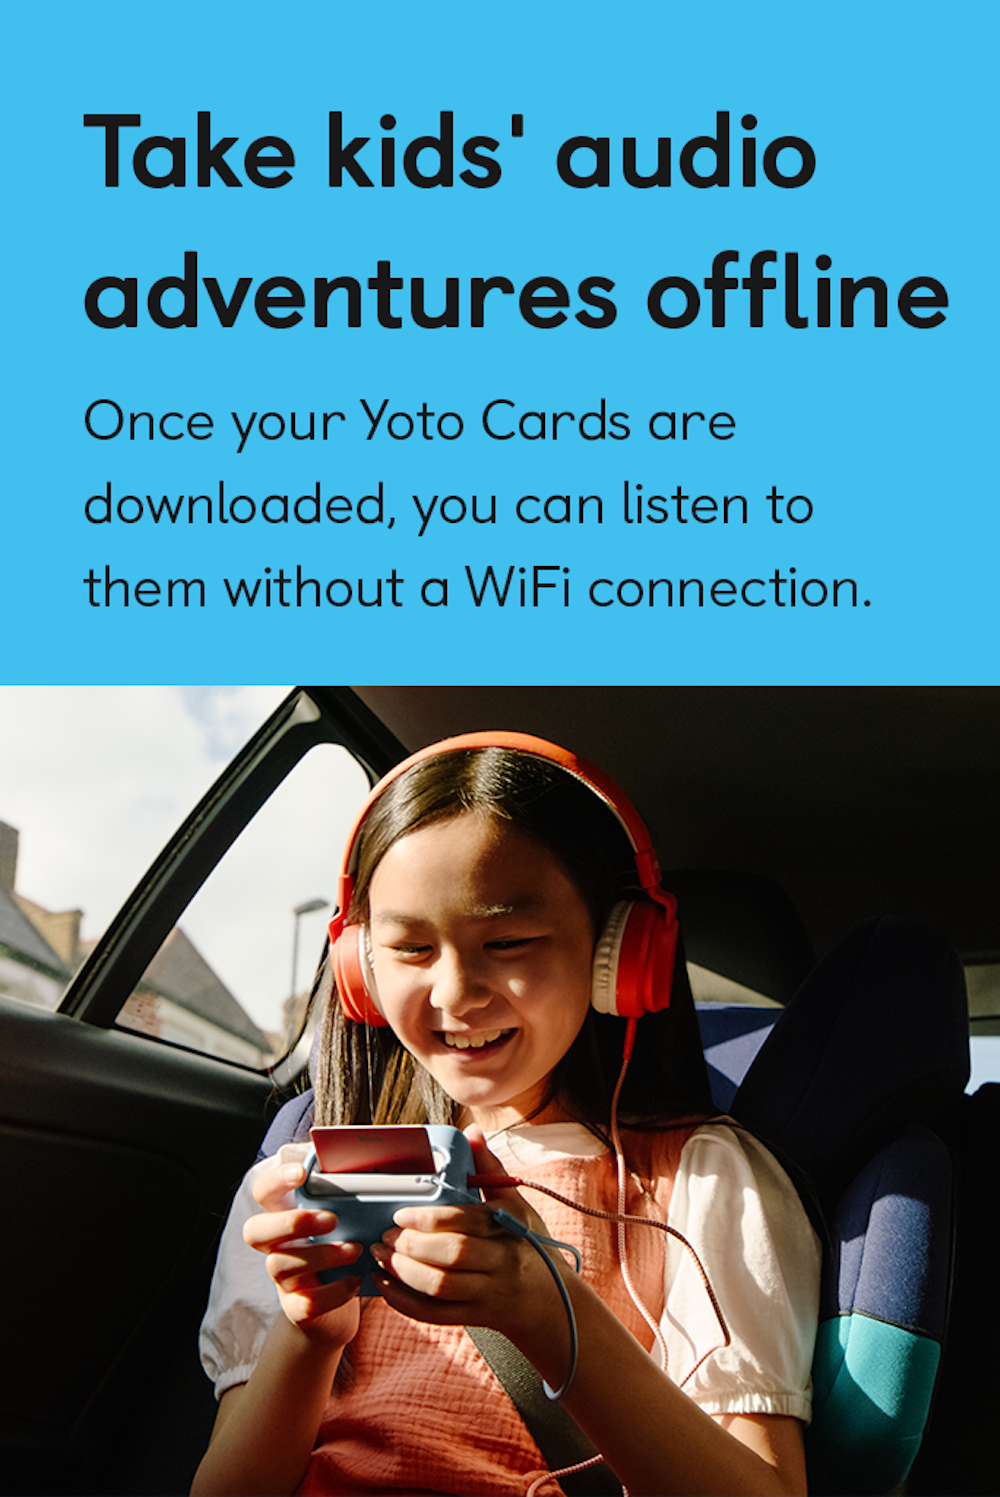 Take kids' audio adventures offline. Once your Yoto Cards are downloaded, you can listen to them without a WiFi connection.